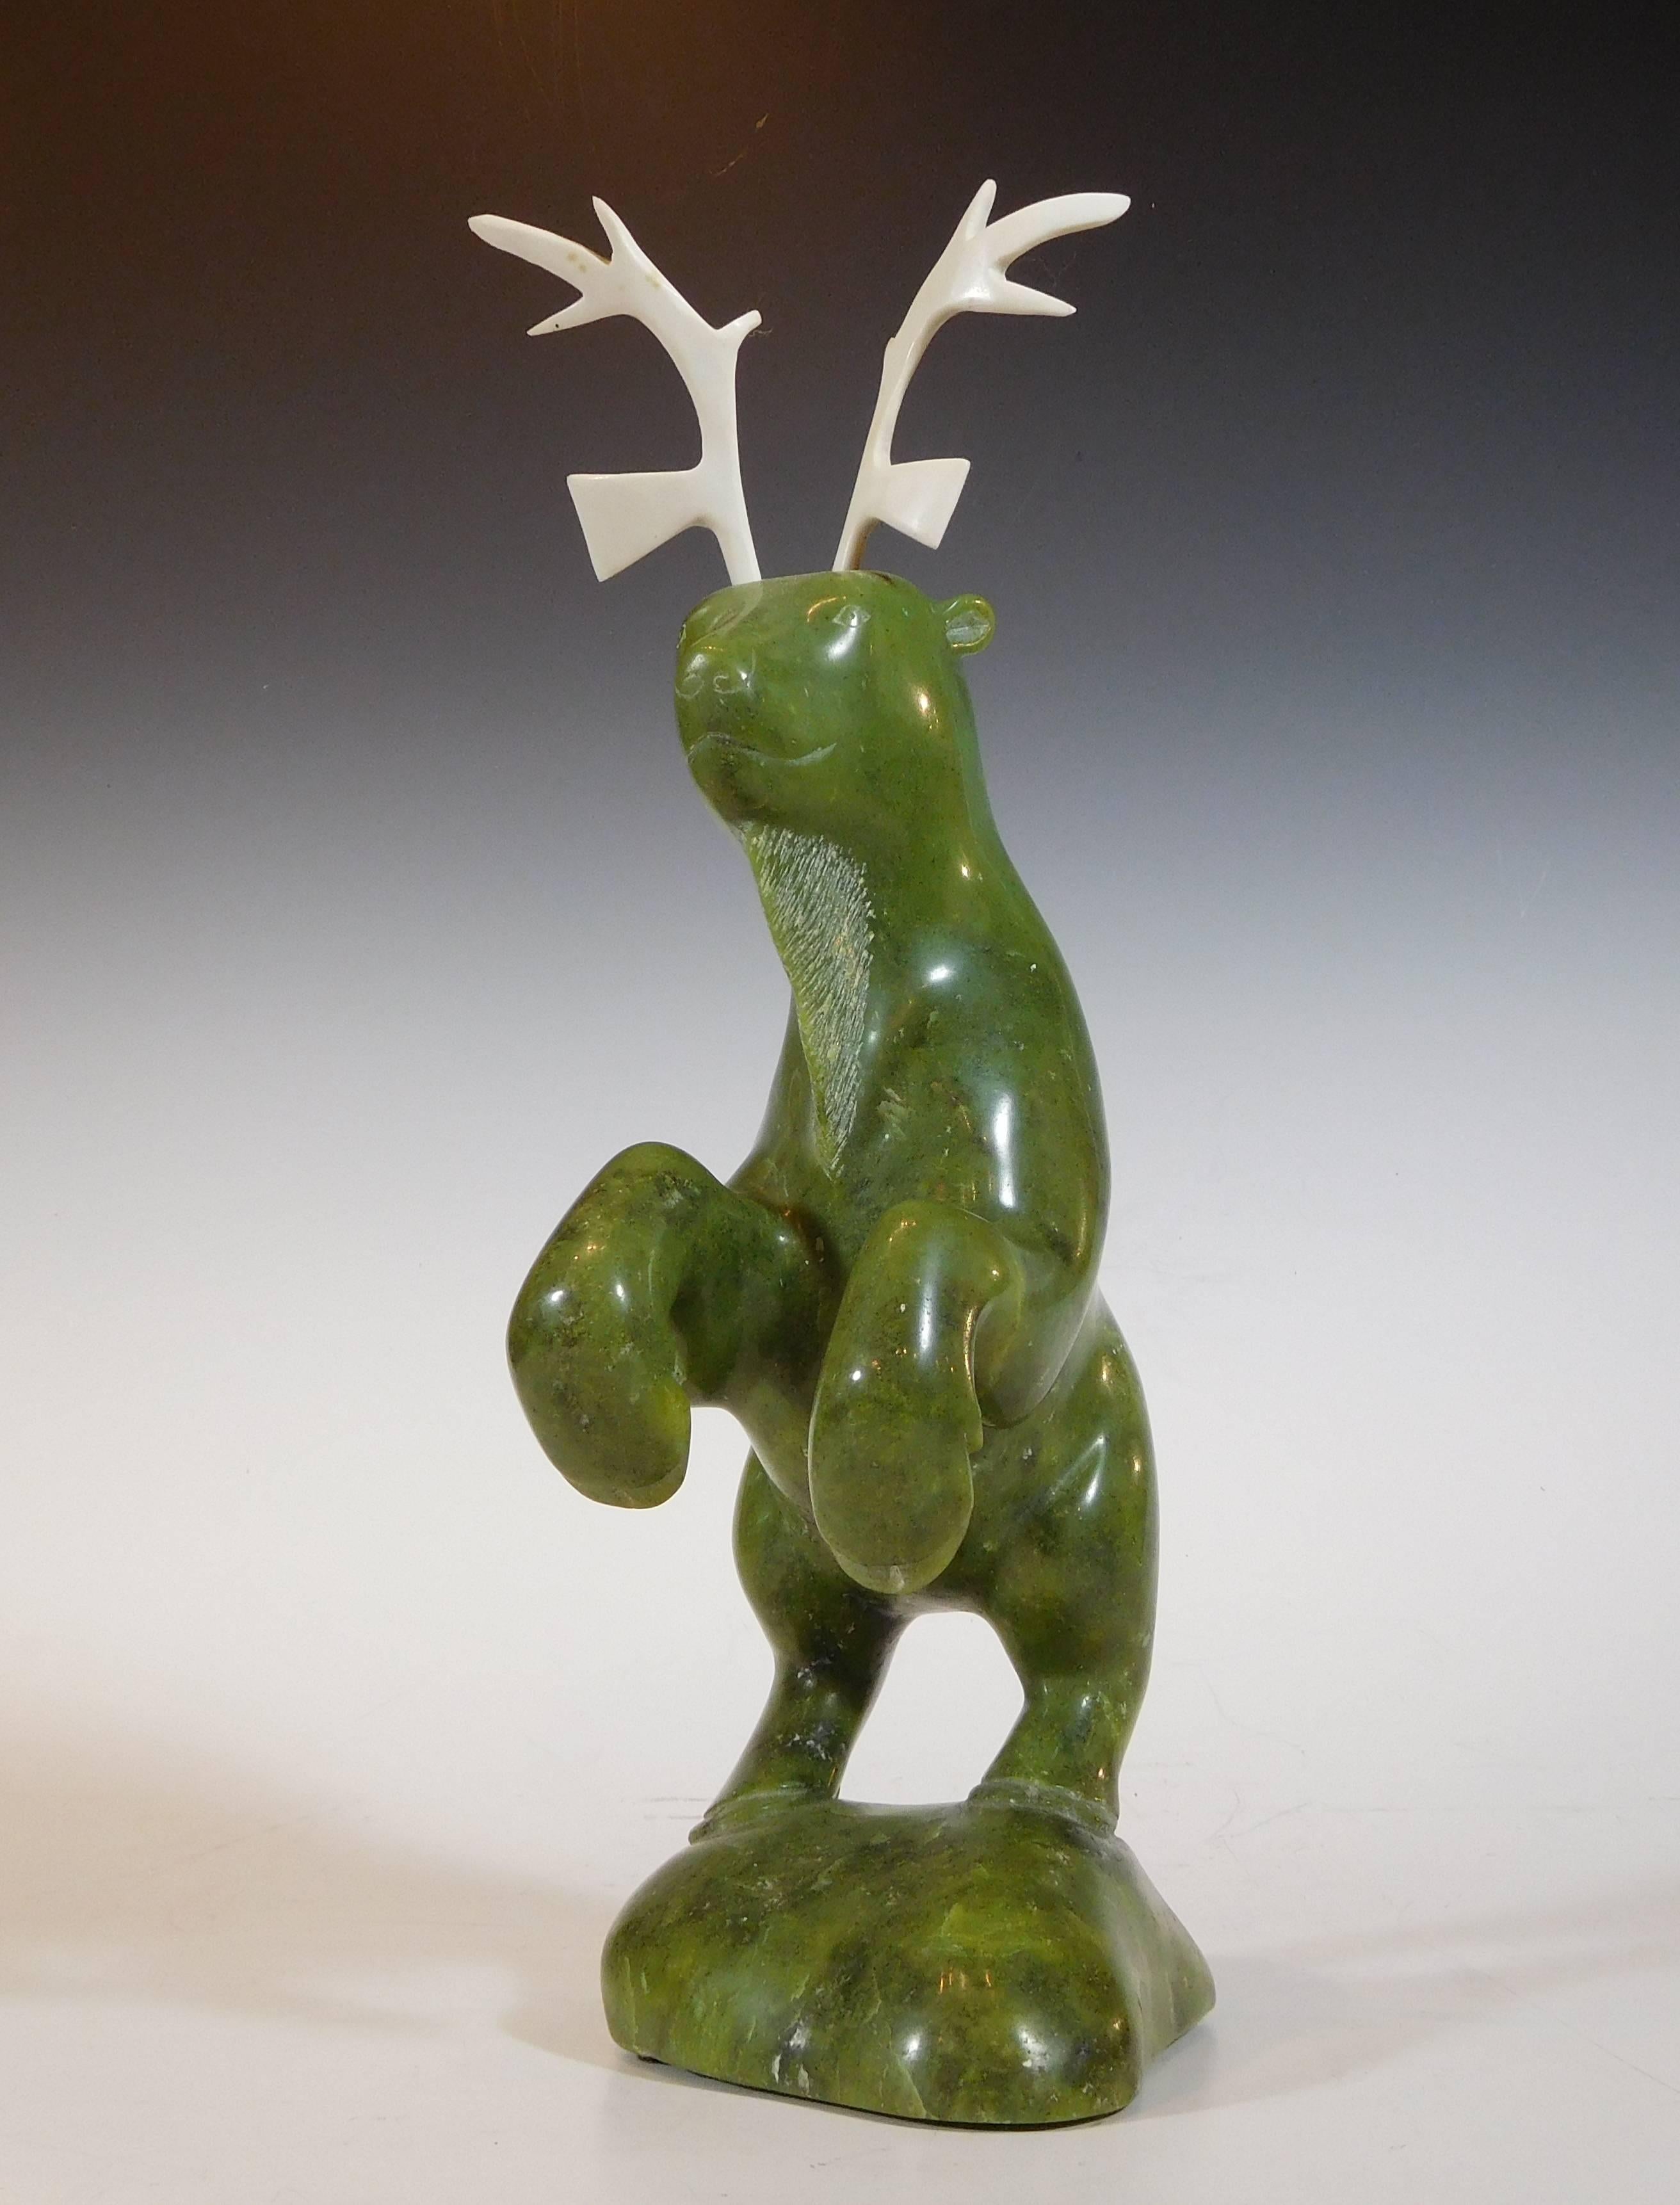 Inuit master carving of a dancing caribou in noble serpentine and caribou bone by Pitsiula Michael, signed and dated 1986 (as incised on the base), of Lake Harbour, Baffin Island, Nunavut, Canada. The Canadian Government official authentication tag